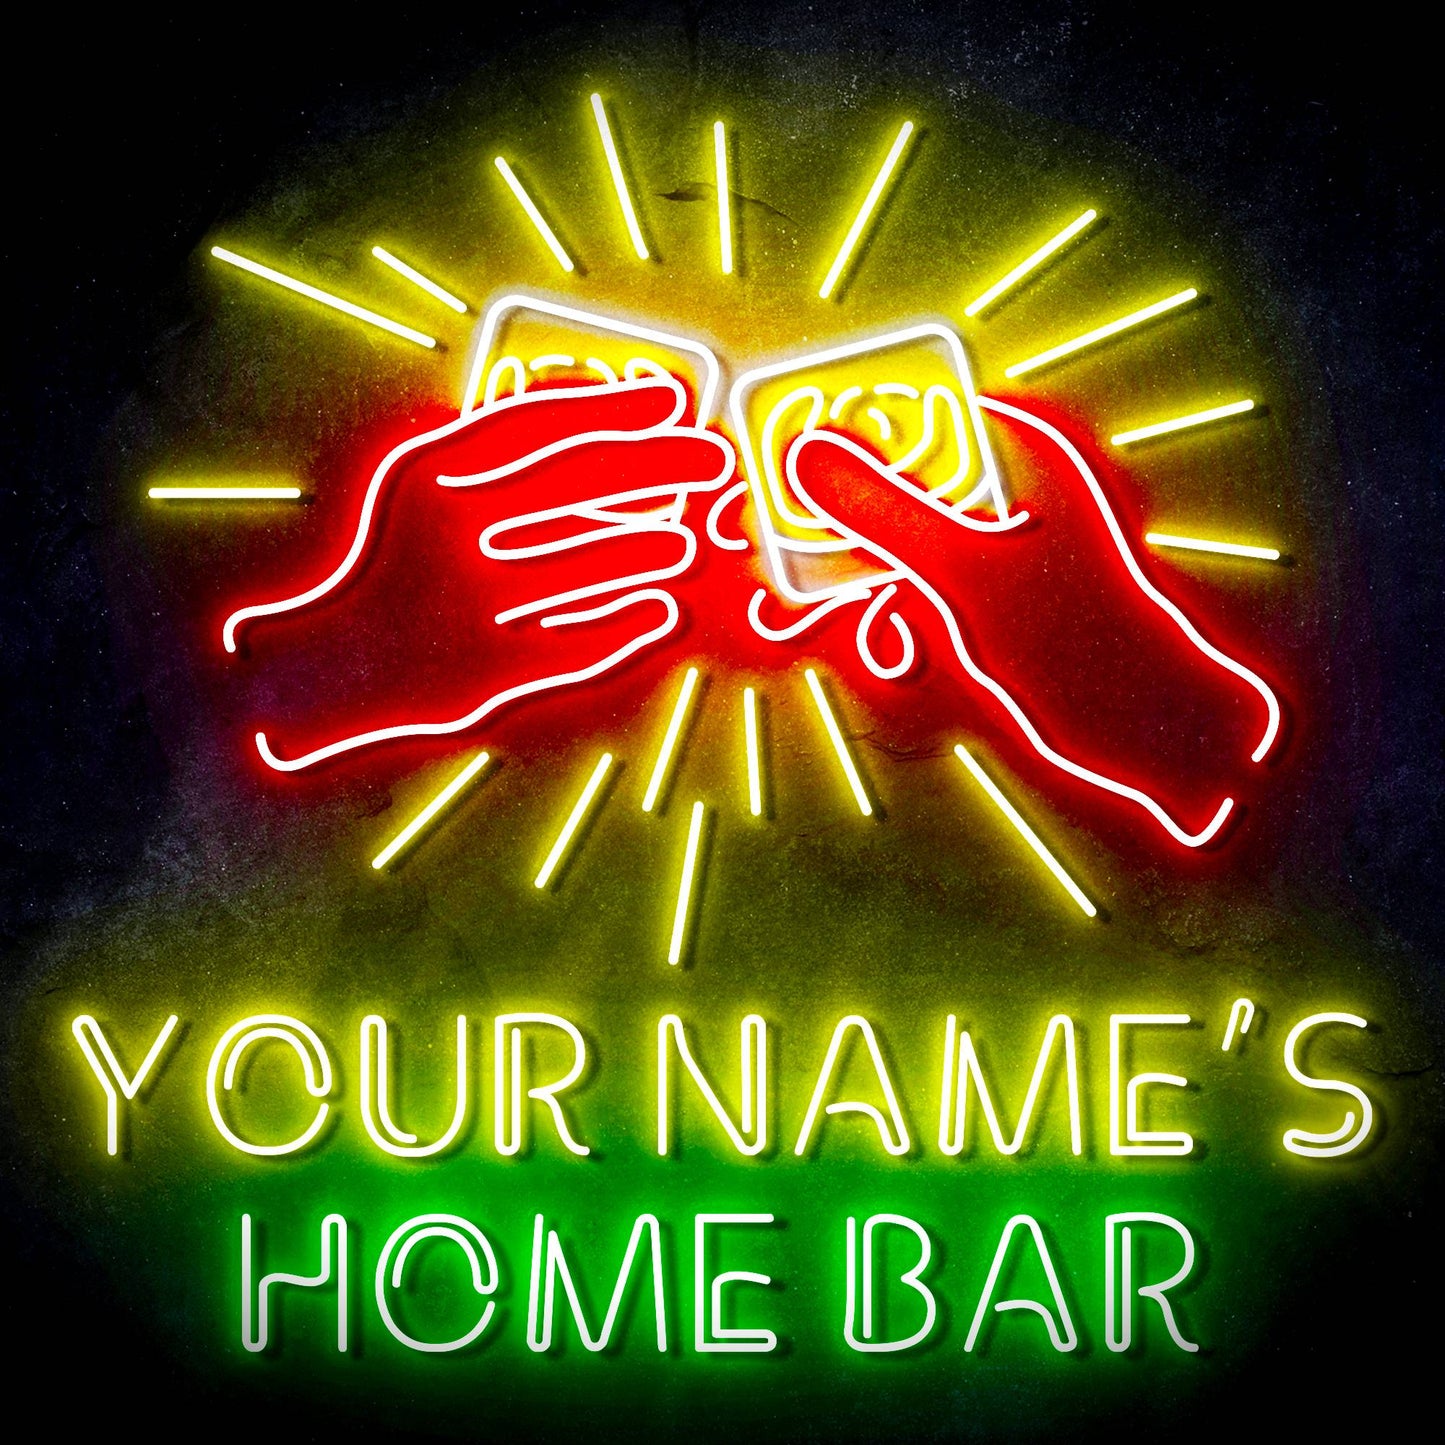 Personalized Ultra-Bright Gin Home Bar LED Neon Sign - Way Up Gifts